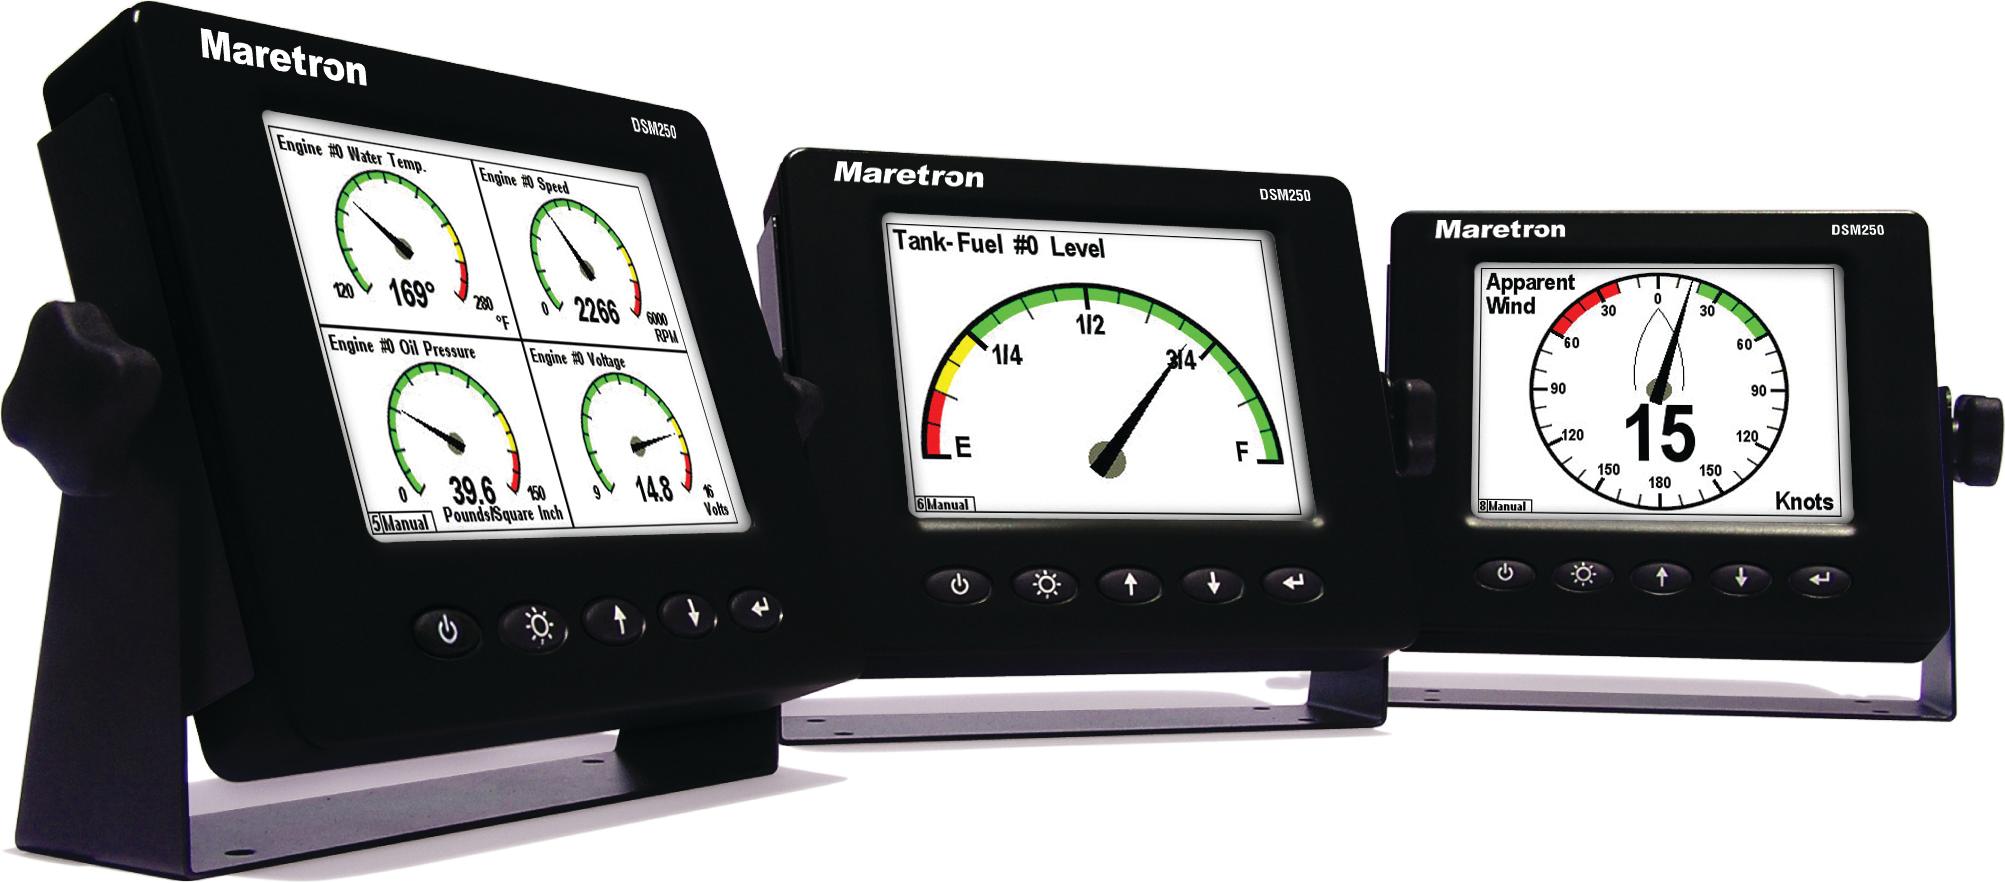 Onboard vessel monitoring with Maretron